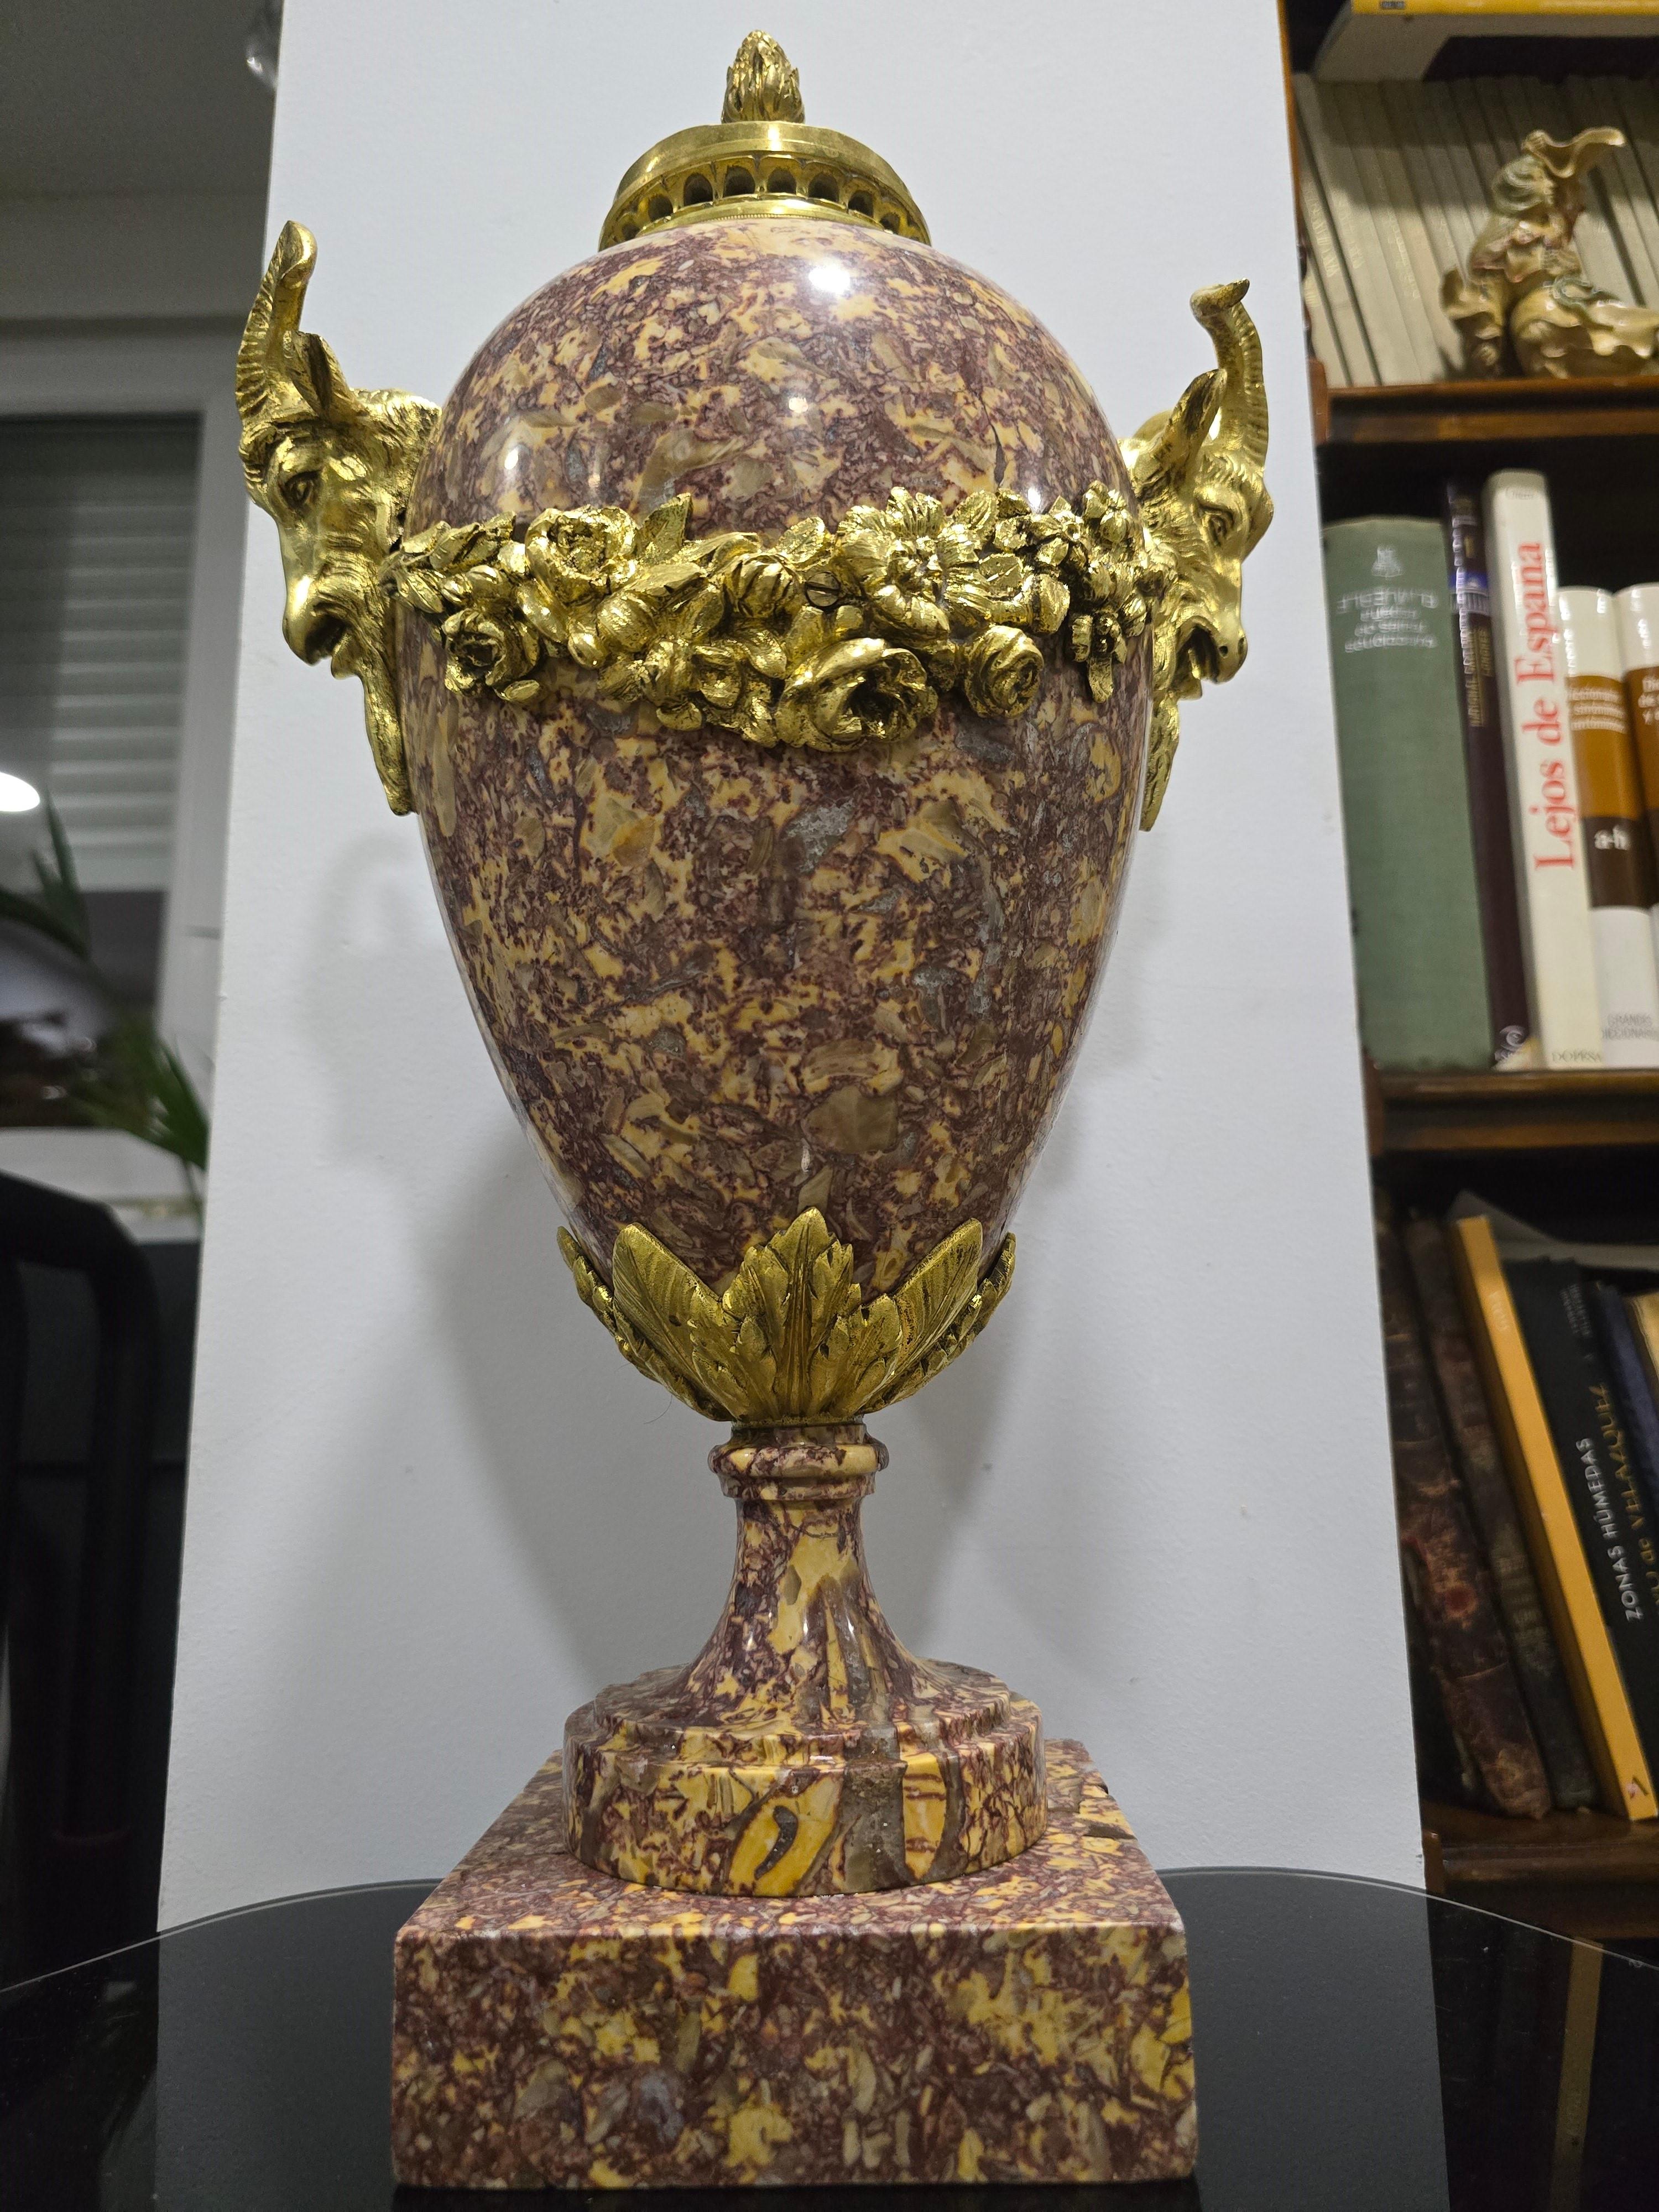 This decorative French vase, crafted in gilt bronze and Royal Rouge marble, is a testament to 19th-century elegance. In good condition, it stands at a height of 50 cm with a diameter of 28 cm.

Adorning any space with its beauty and refinement, this